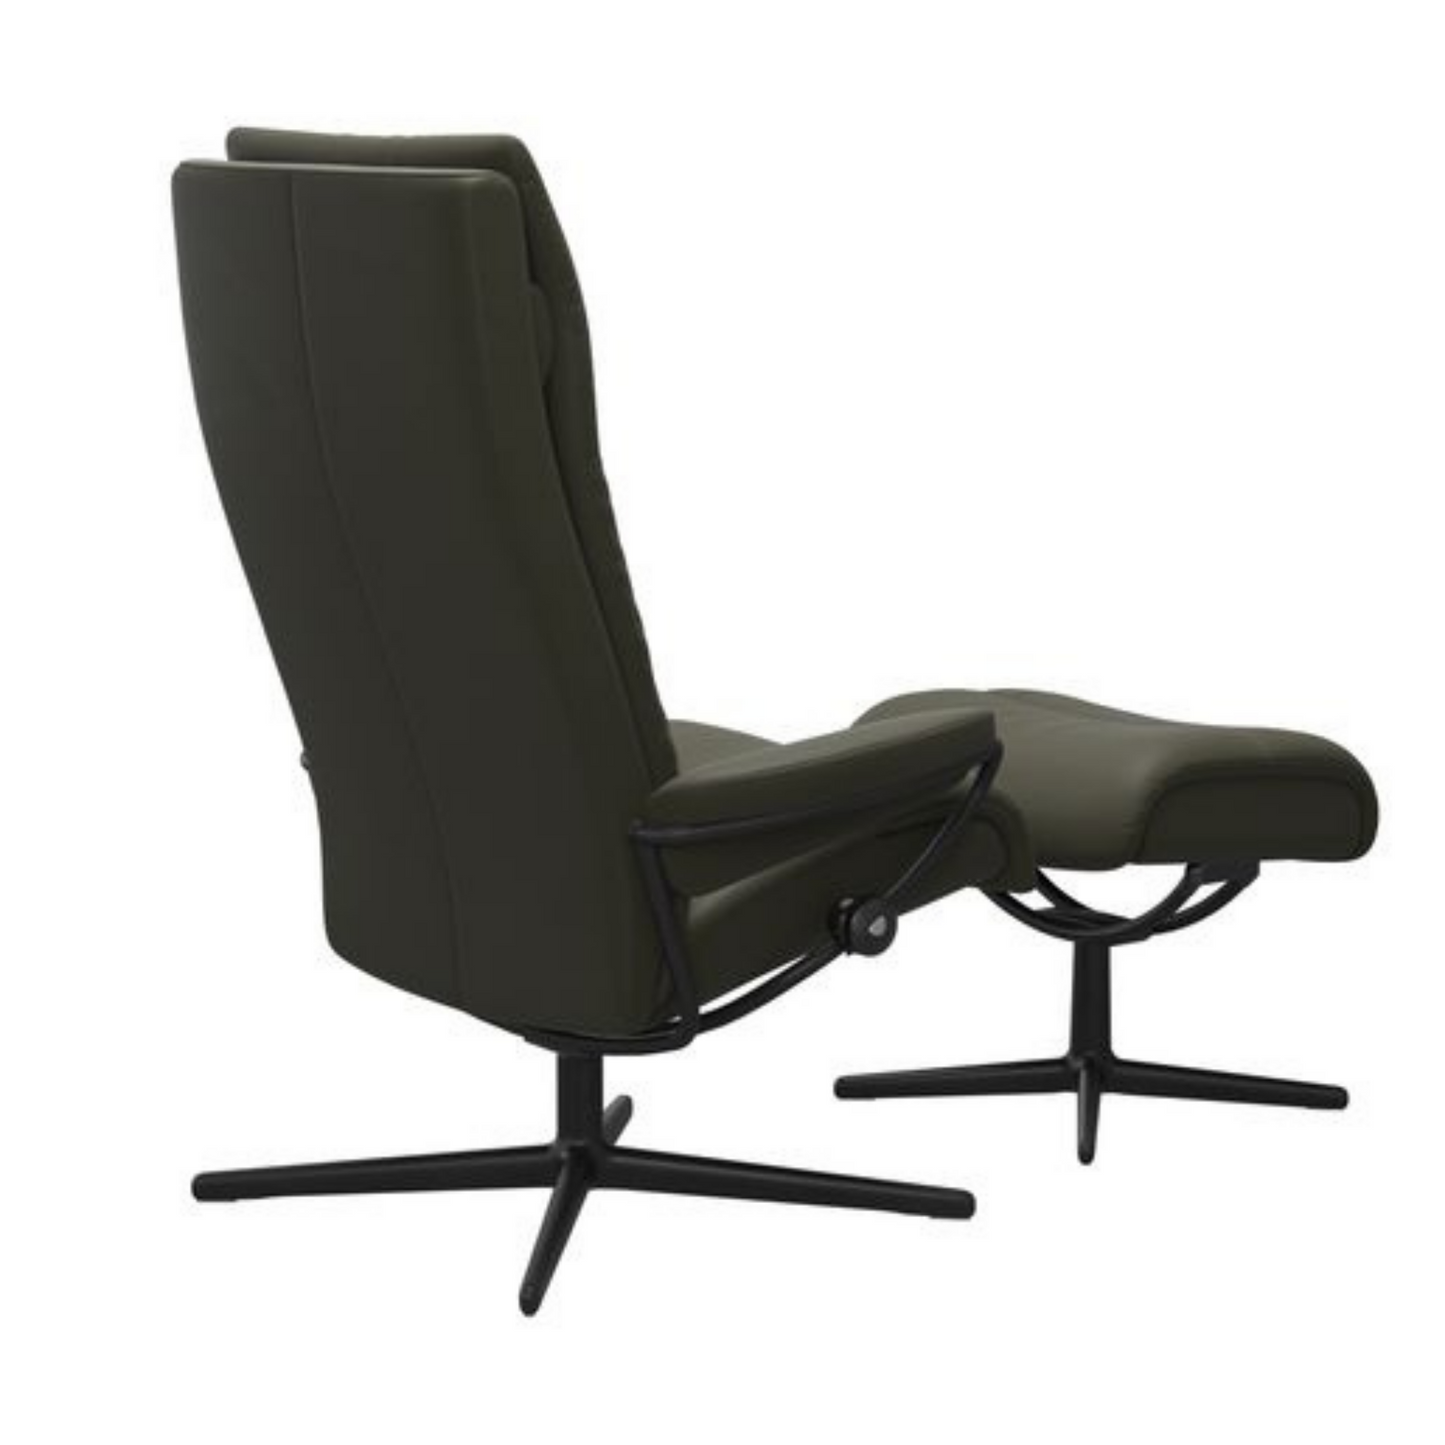 Tokyo High Back Recliner by Stressless